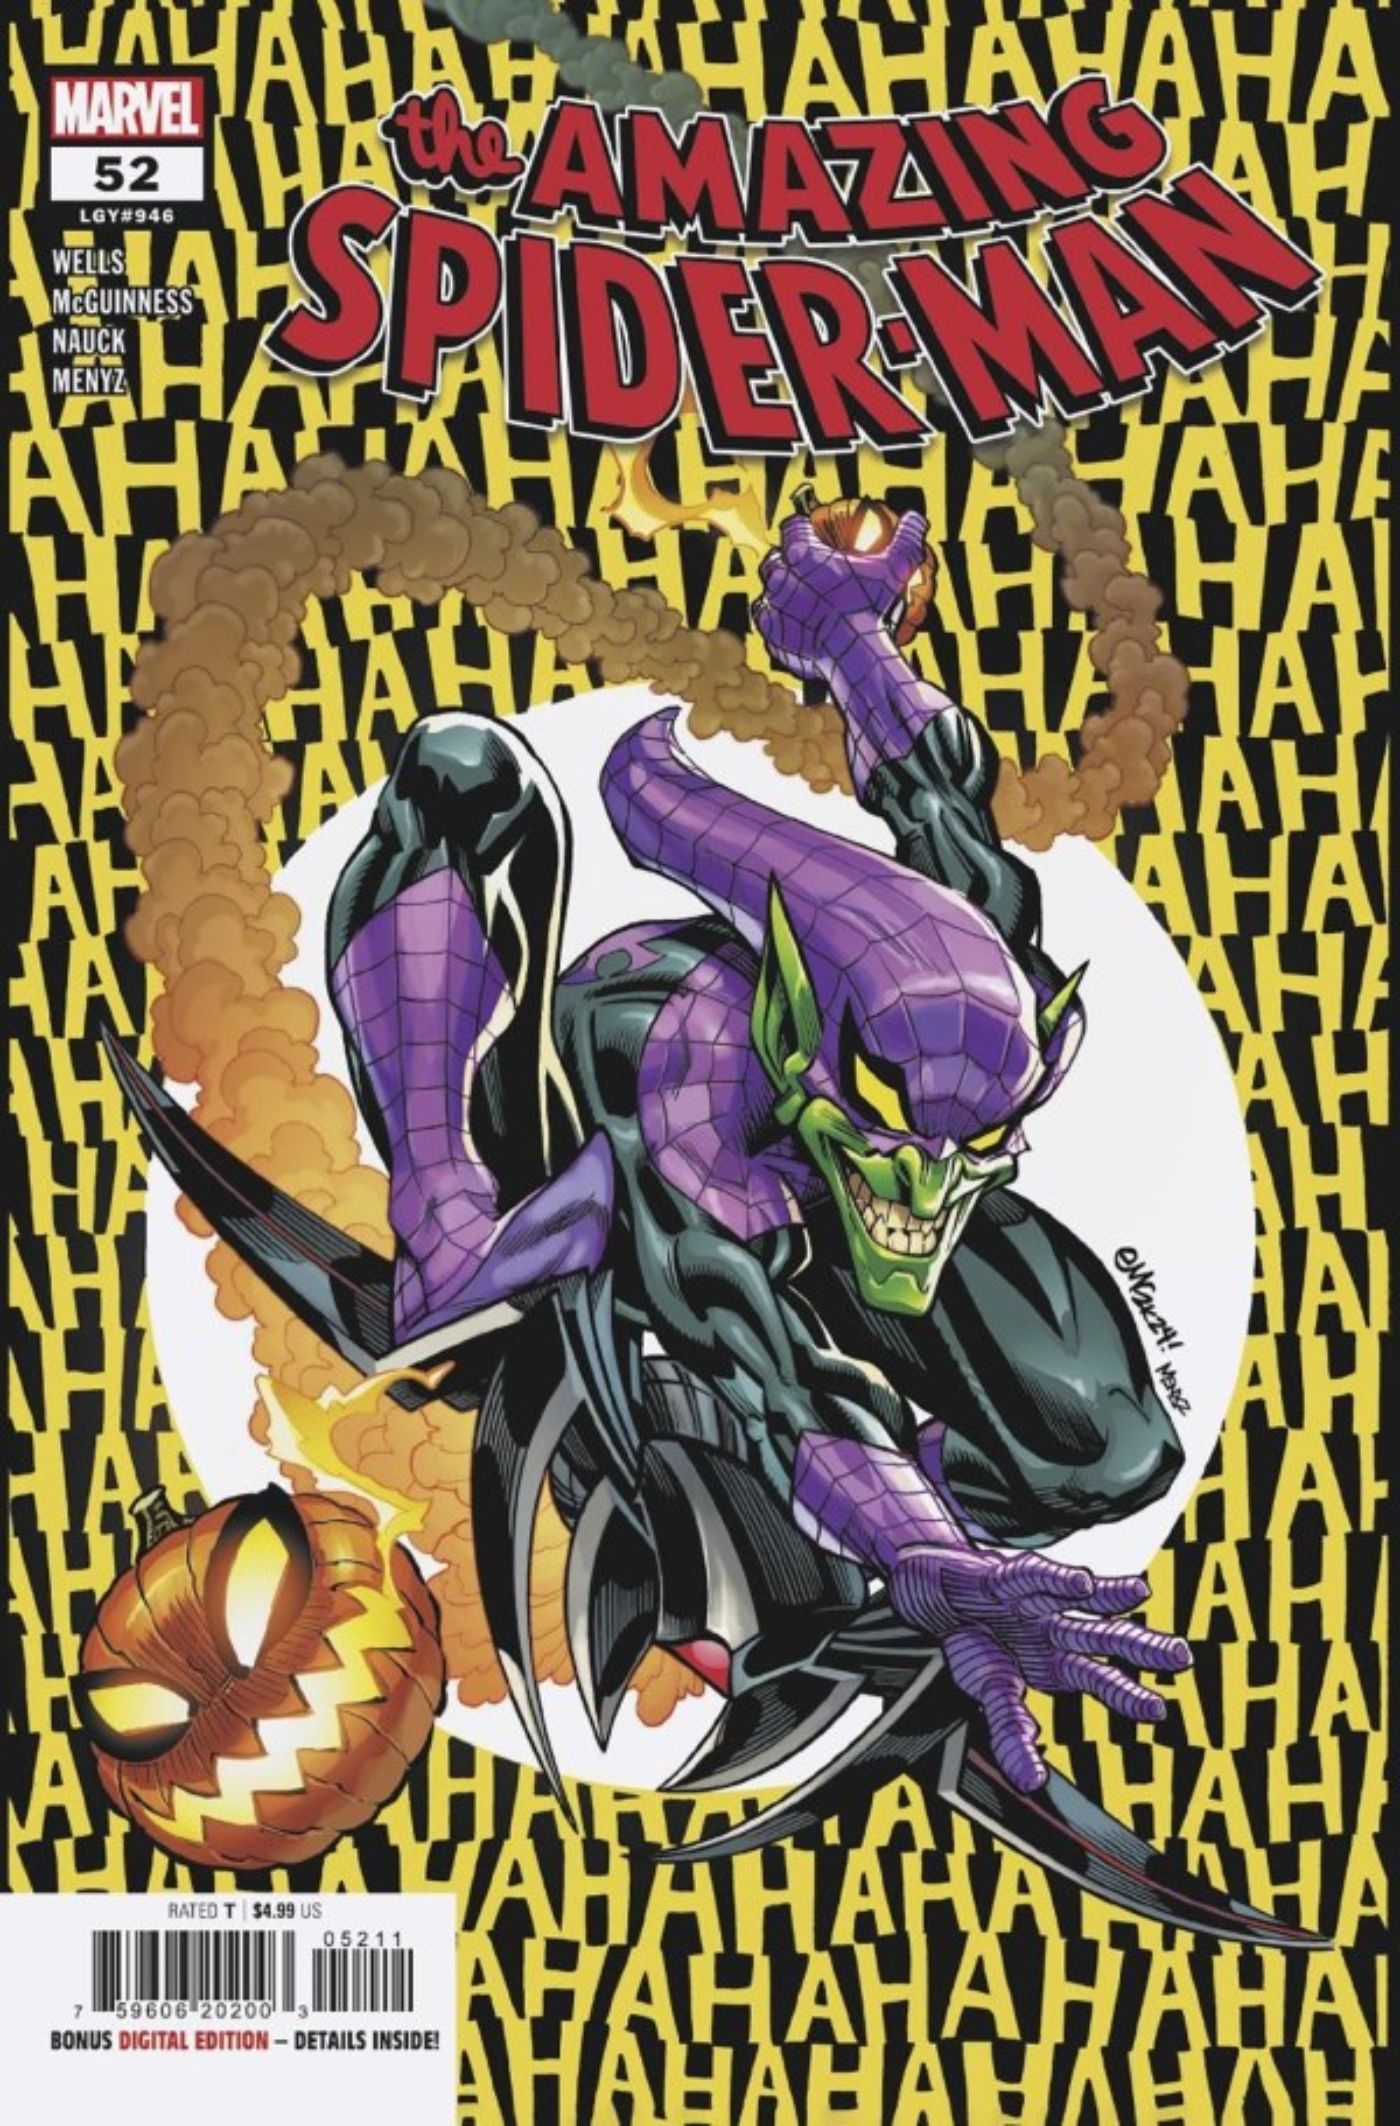 Cover of Amazing Spider-Man #52 featuring the Spider-Goblin.